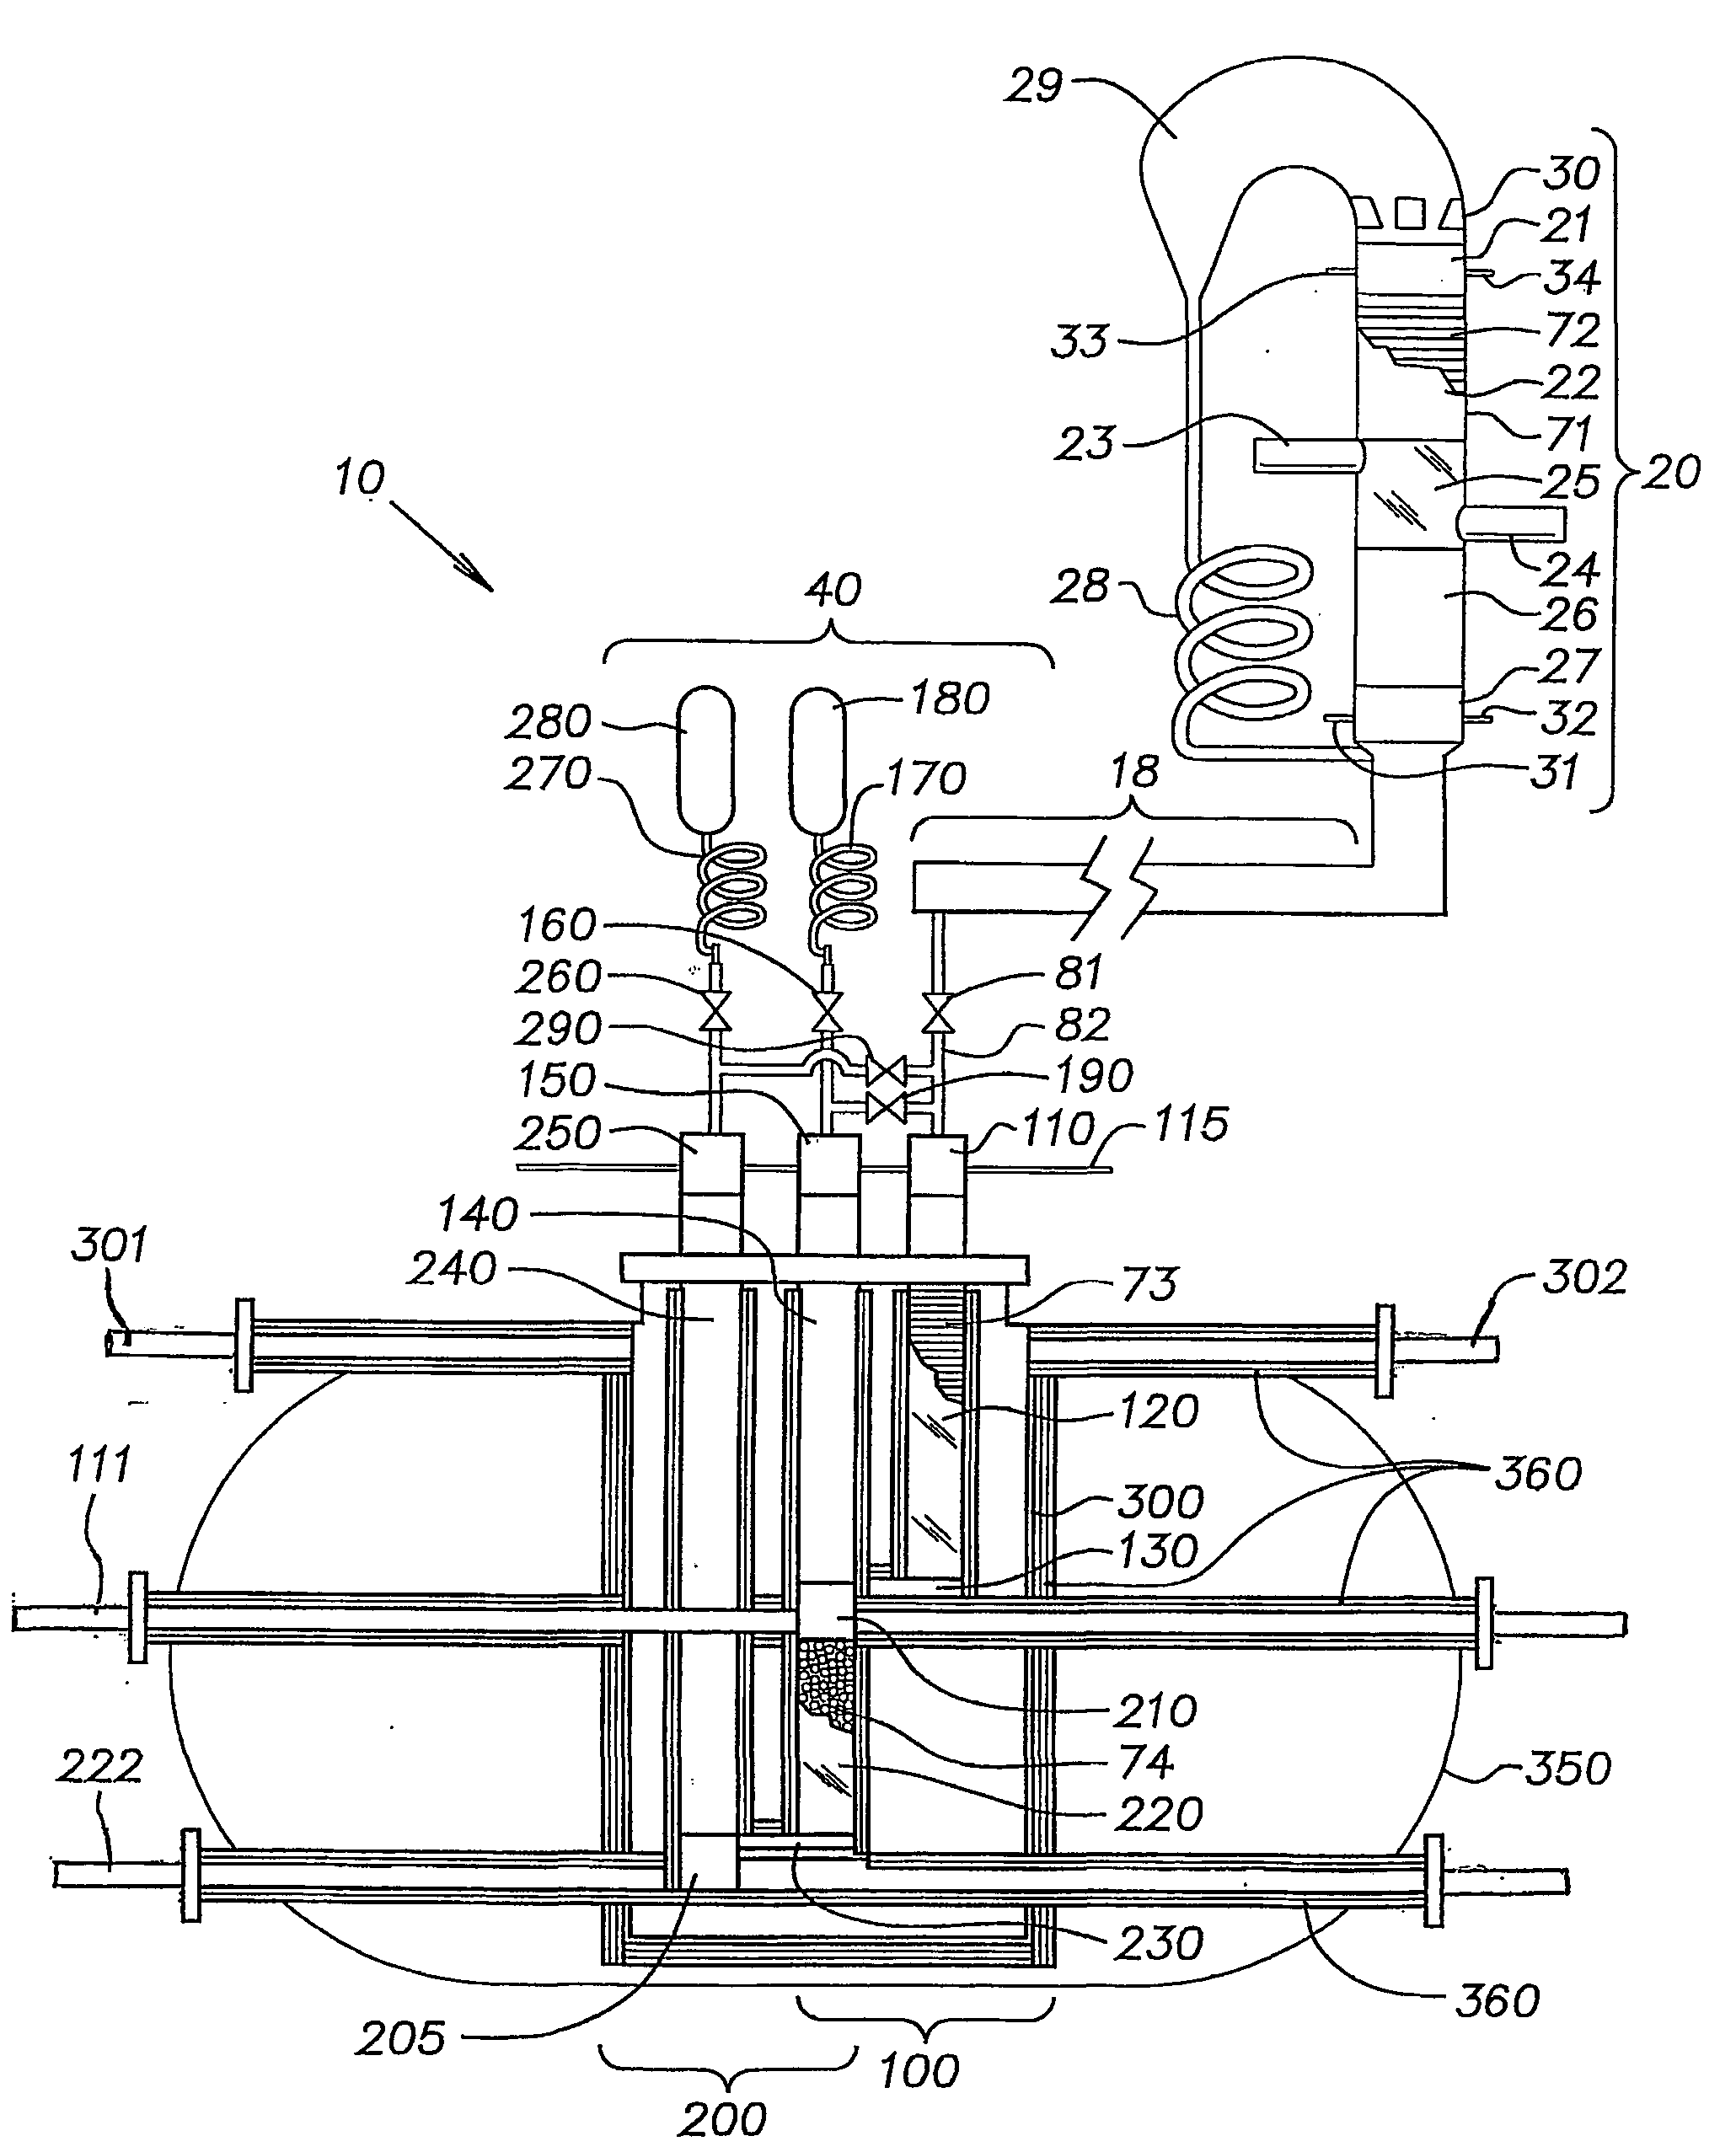 Densifier for simultaneous conditioning of two cryogenic liquids